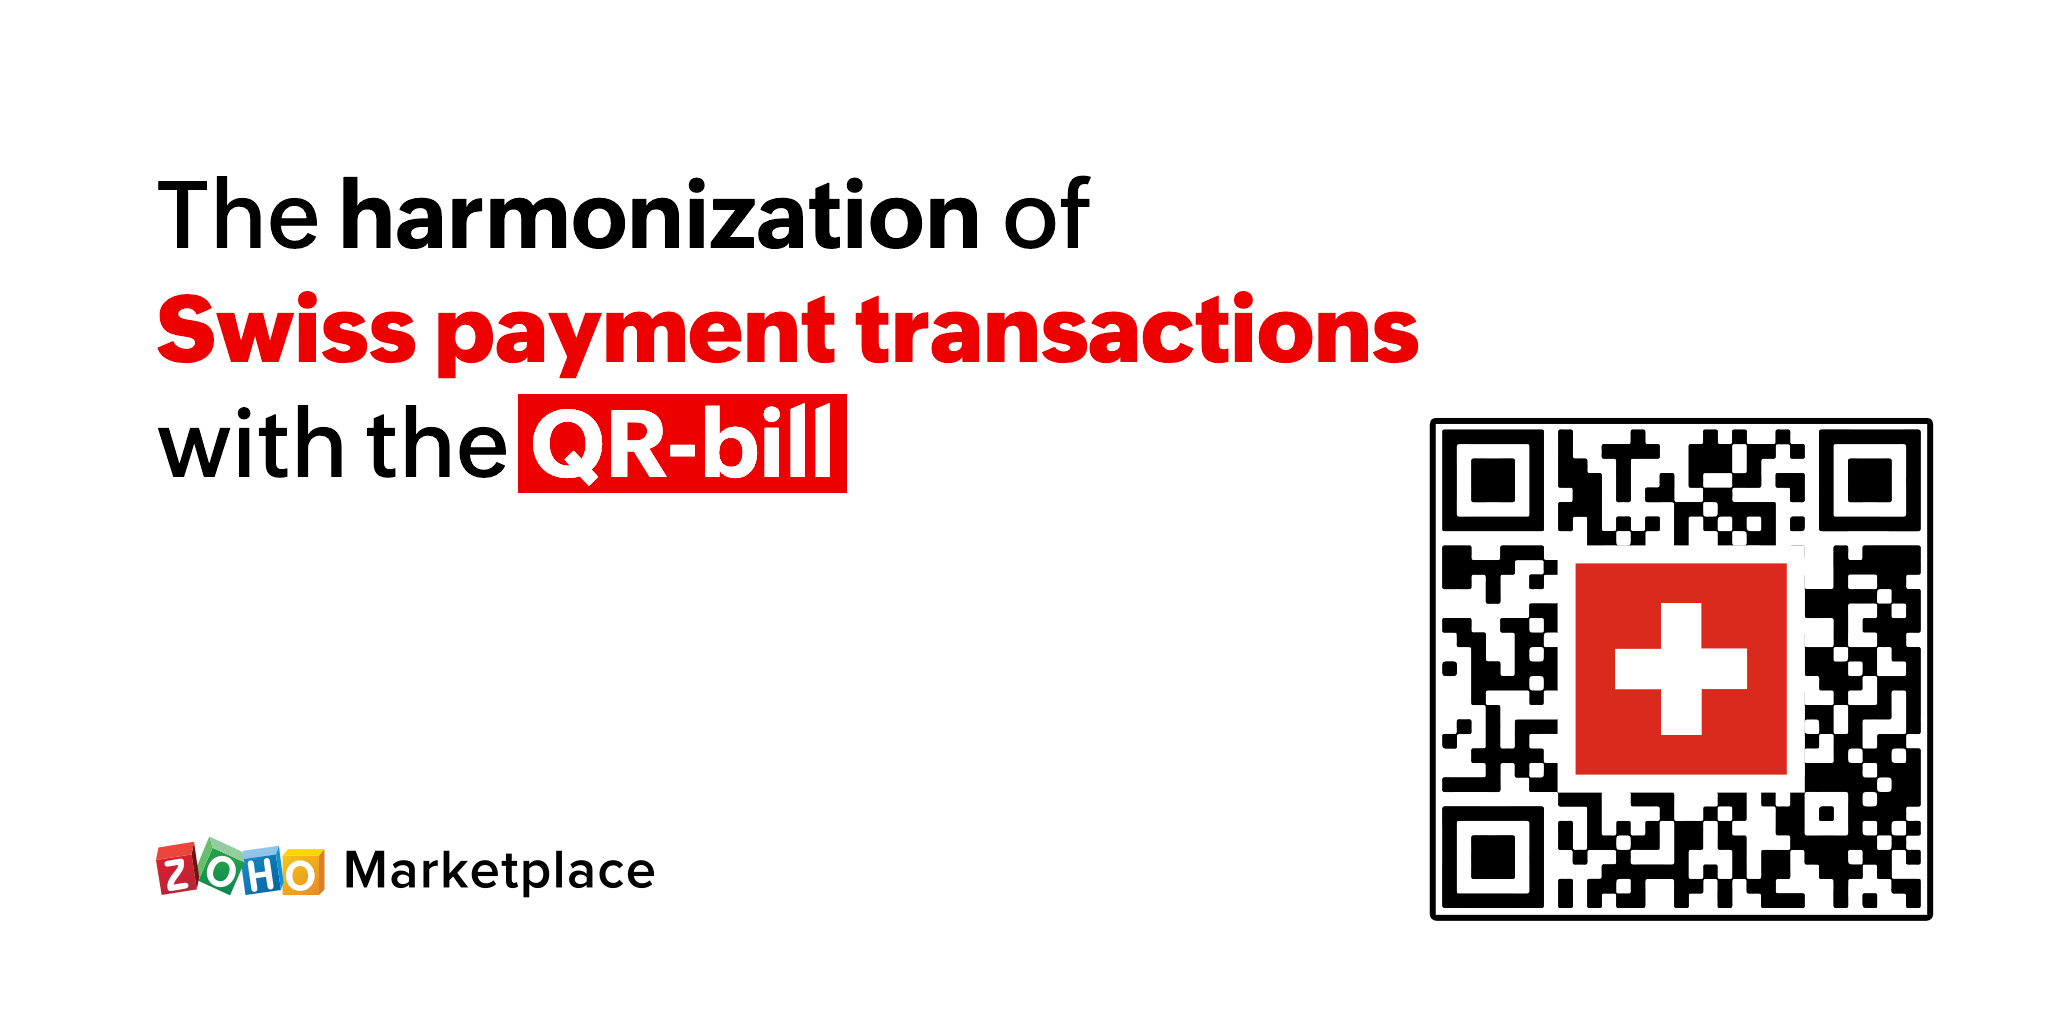 Harmonizing Swiss payment transactions with the QR-bill